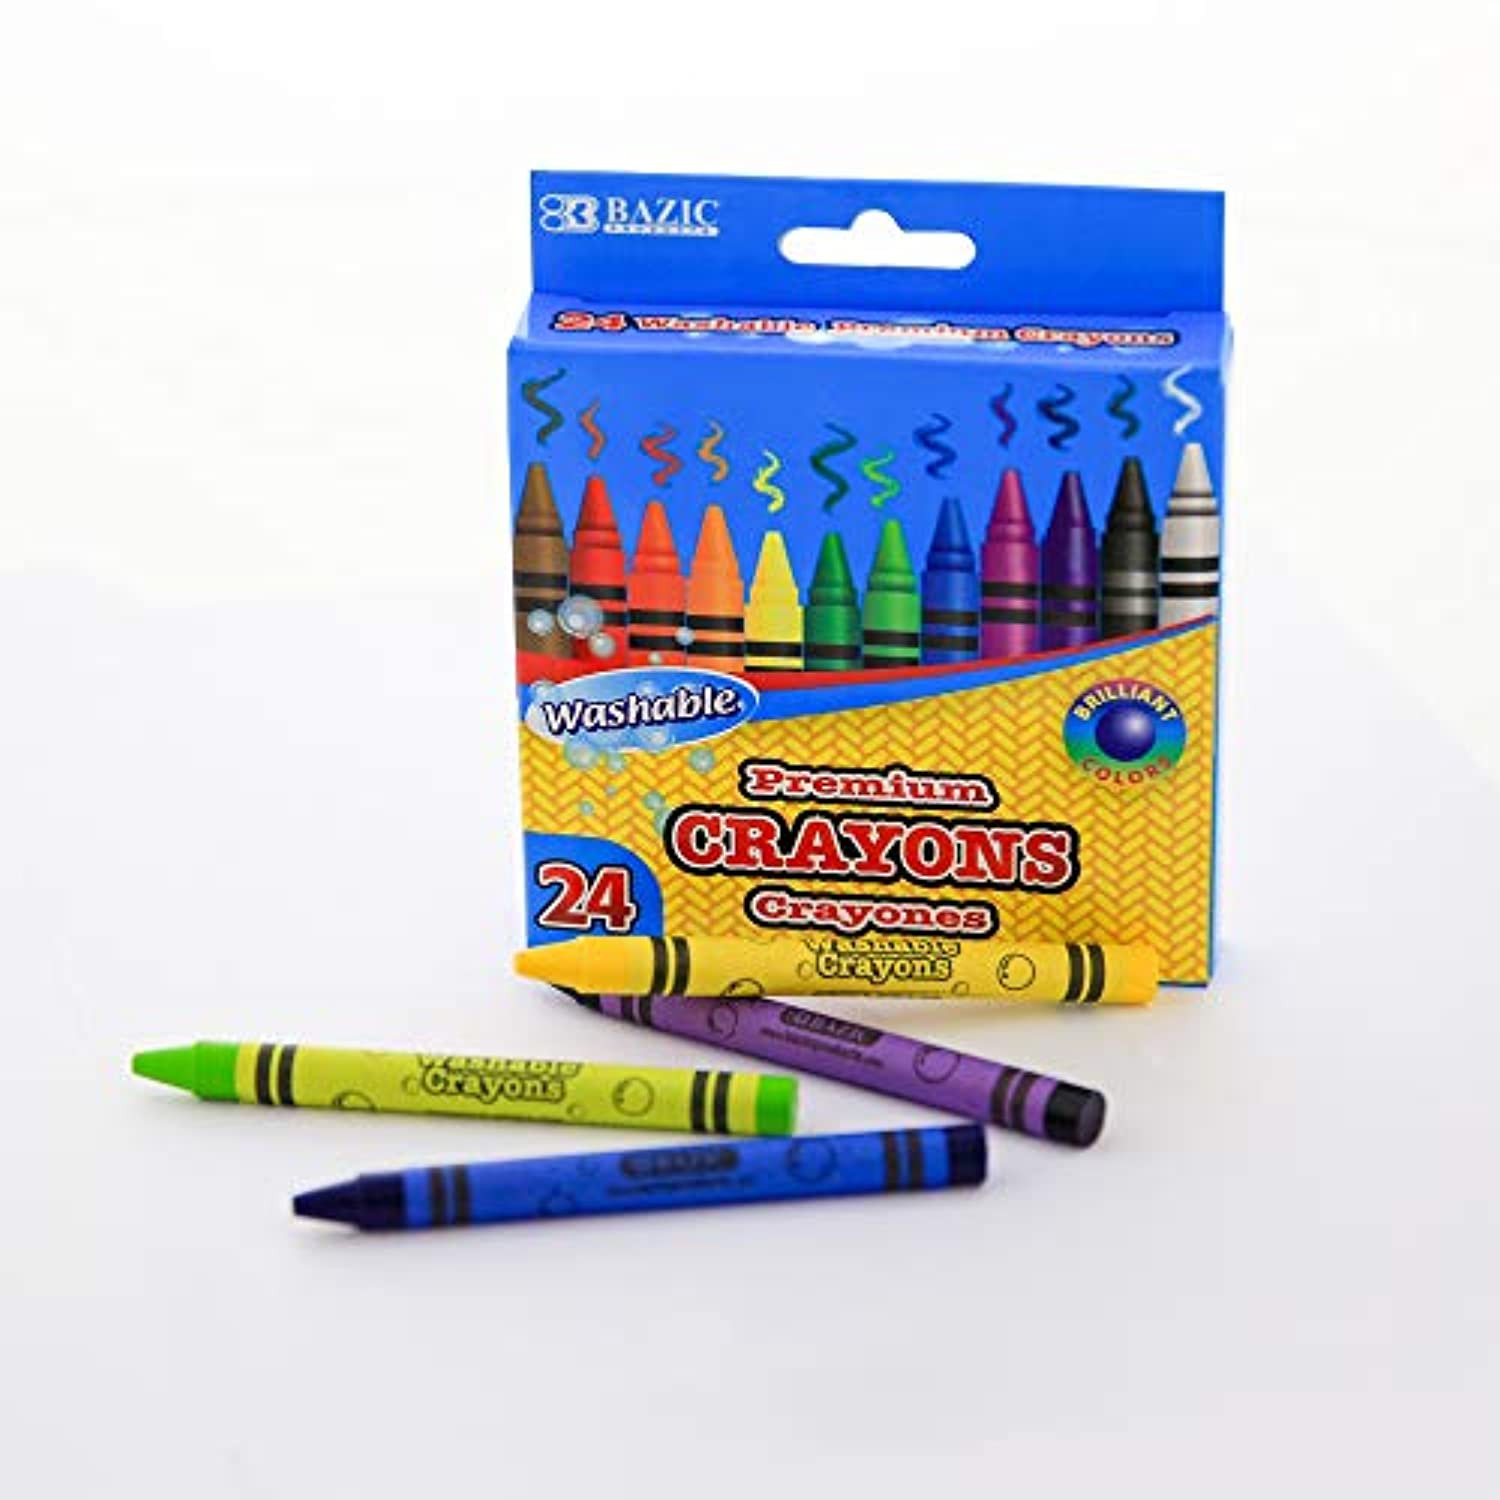 24 Color Washable Premium Crayons, Assorted Coloring Set, School Art Creative Gift for Kids Age 3+